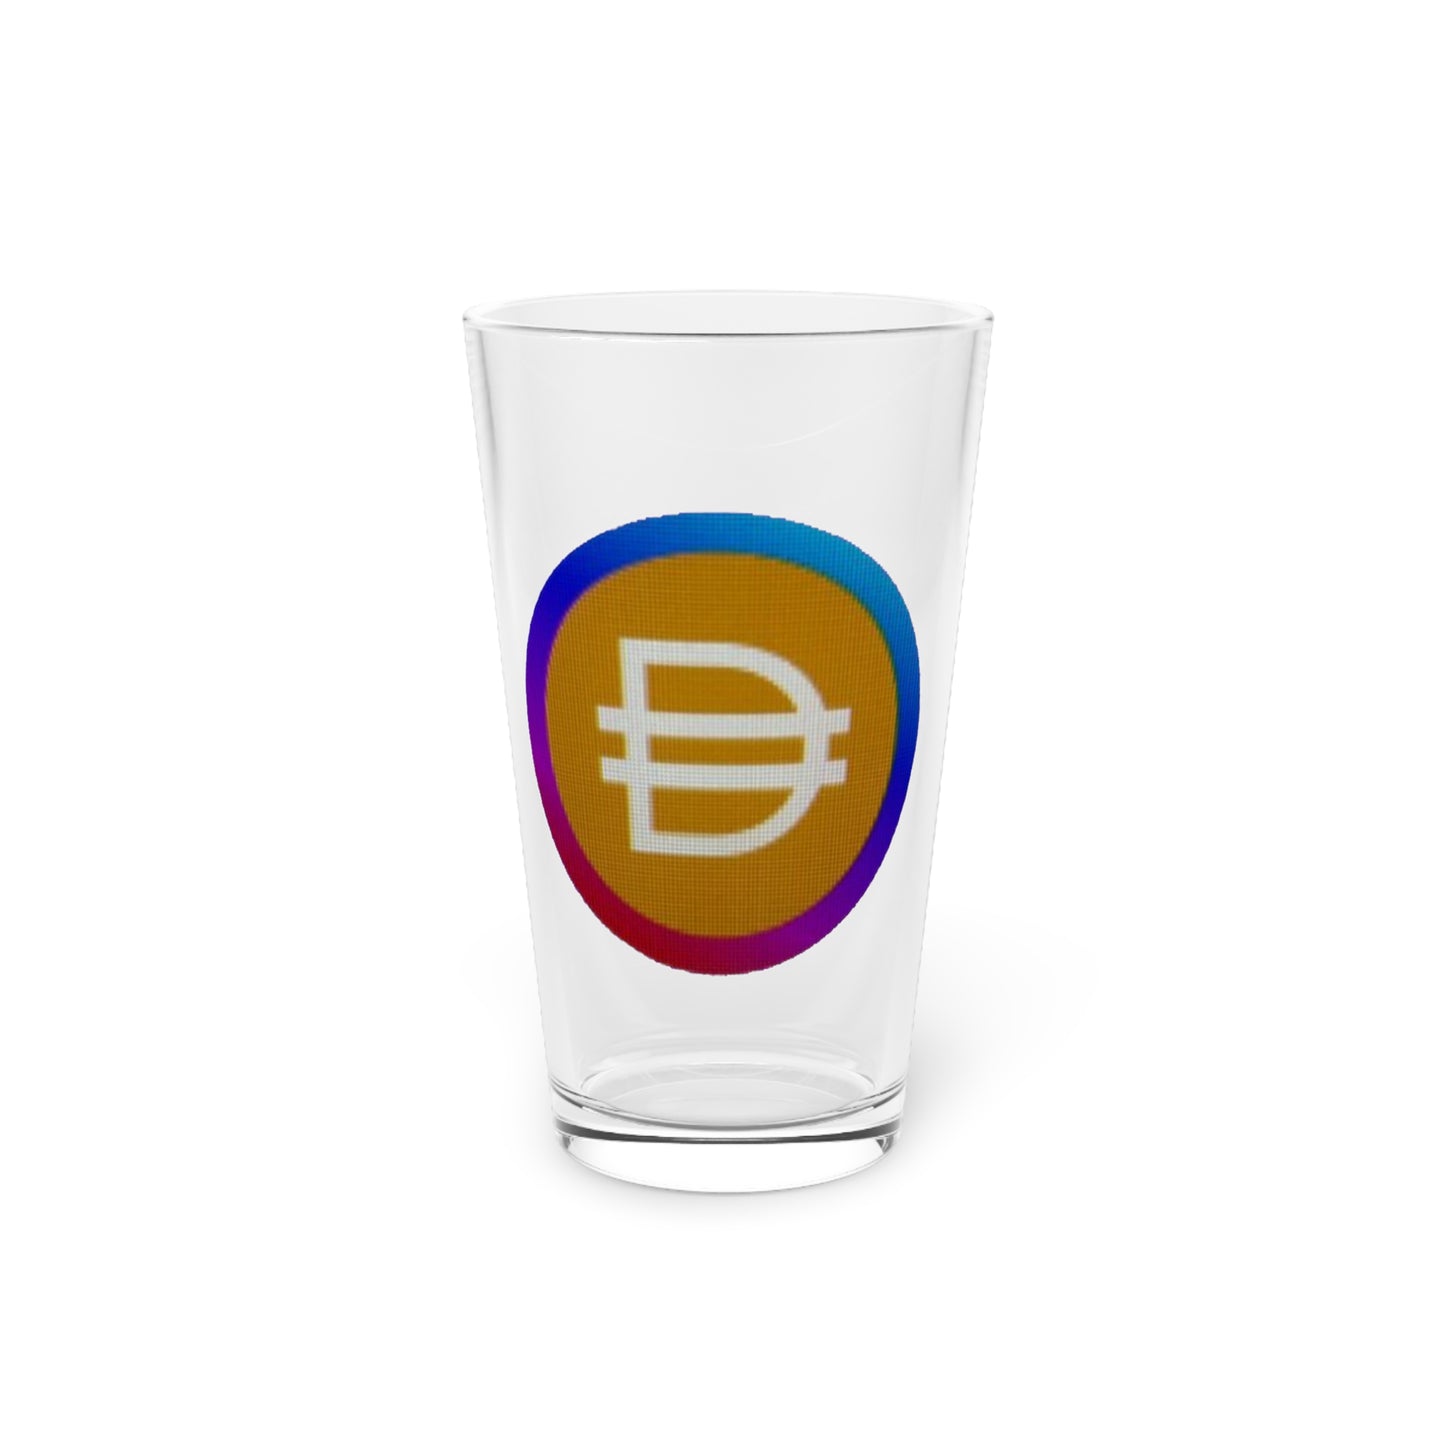 P Dai 16oz Glass - DeFi Outfitters